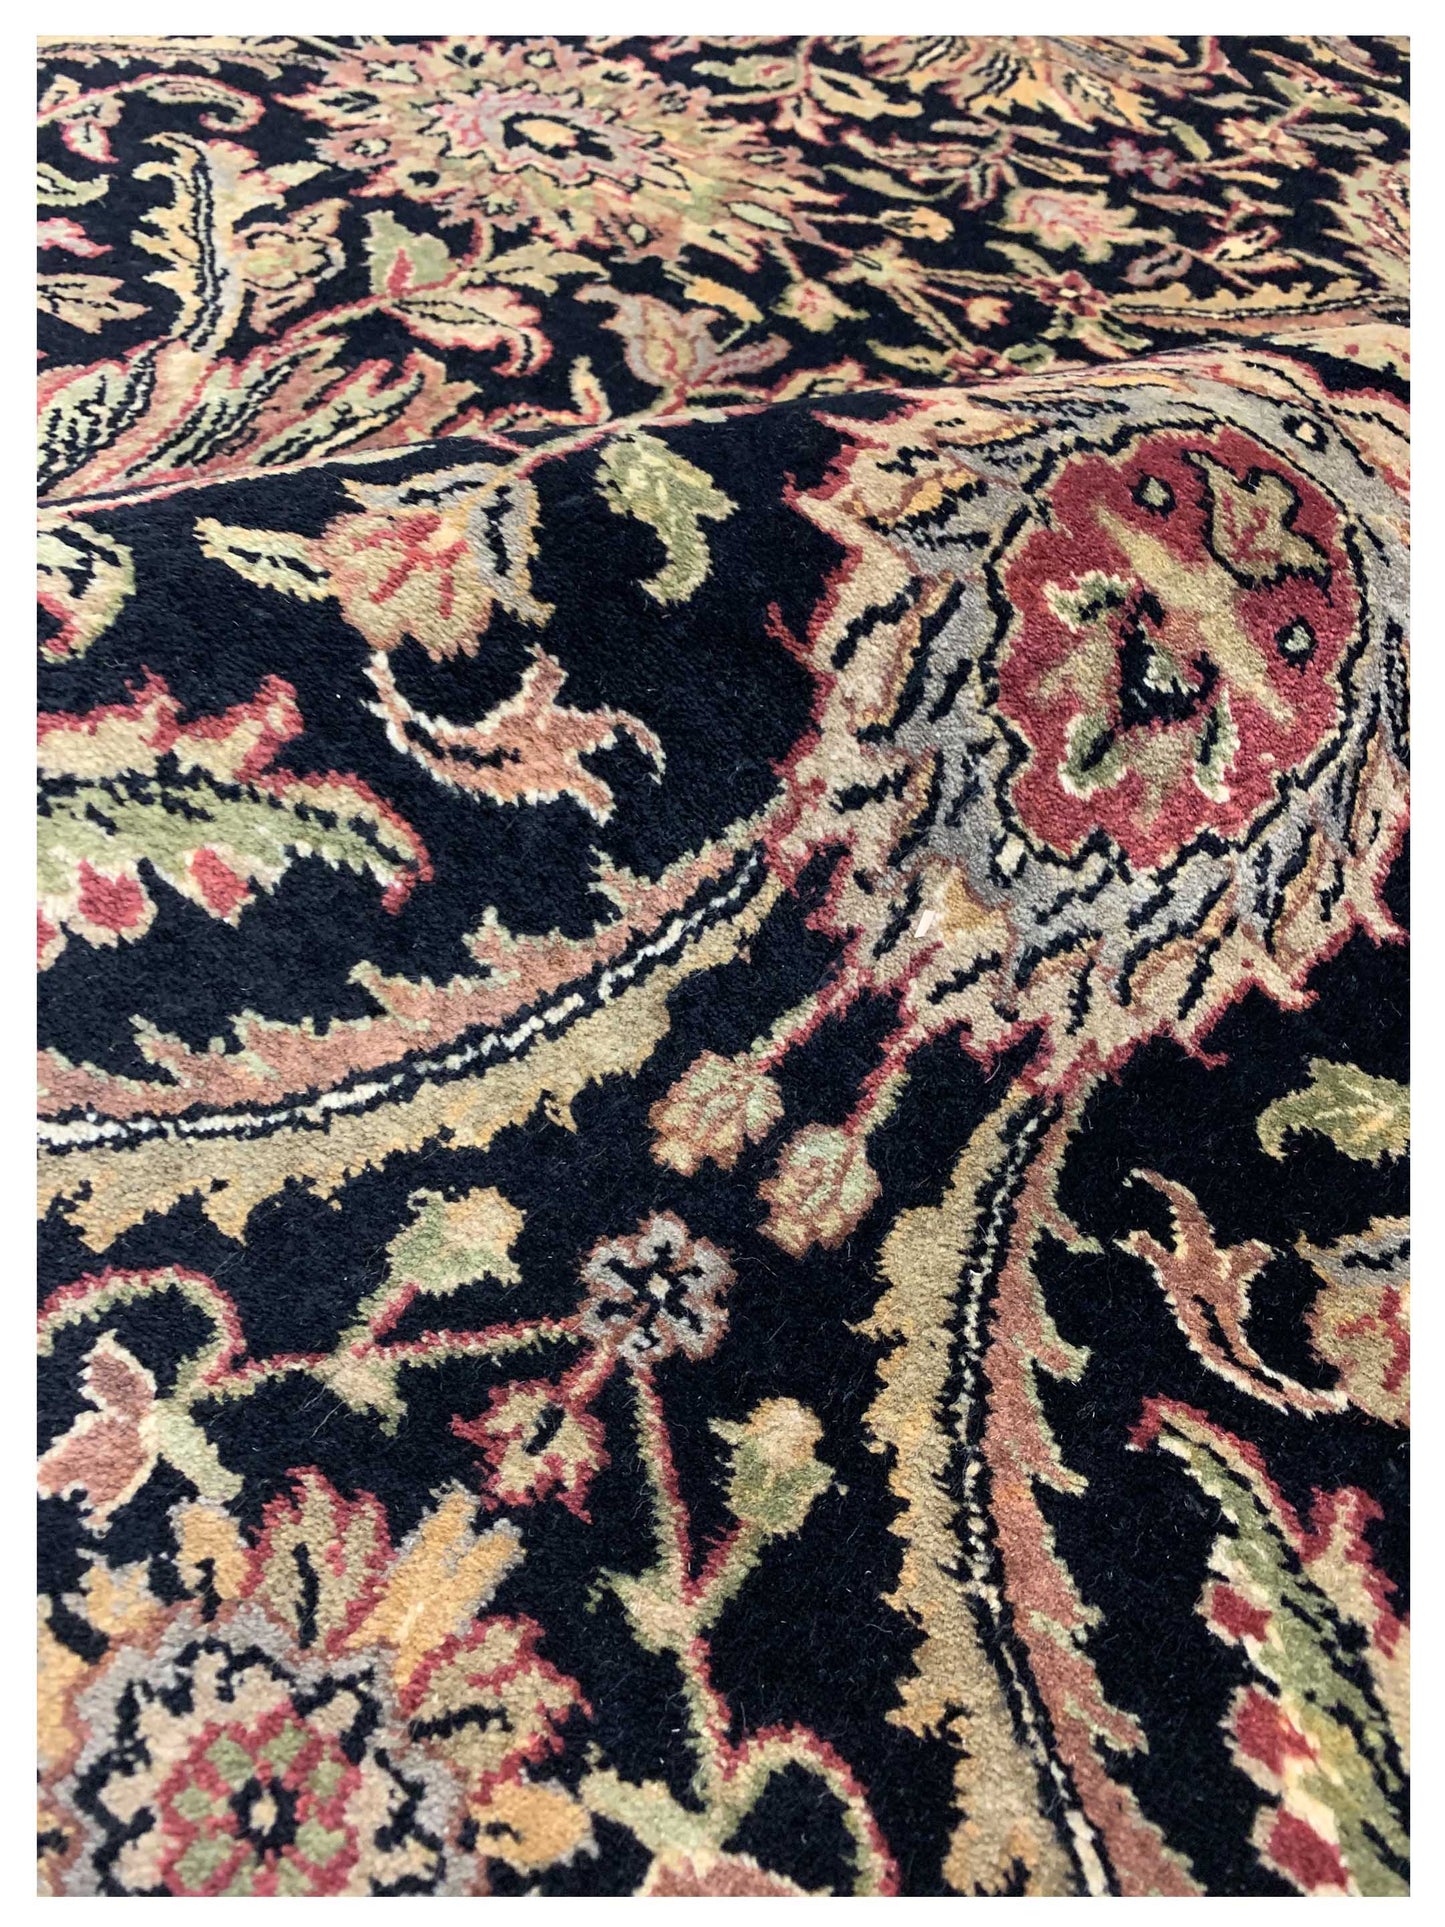 Artisan Michelle  Black Gold Traditional Knotted Rug